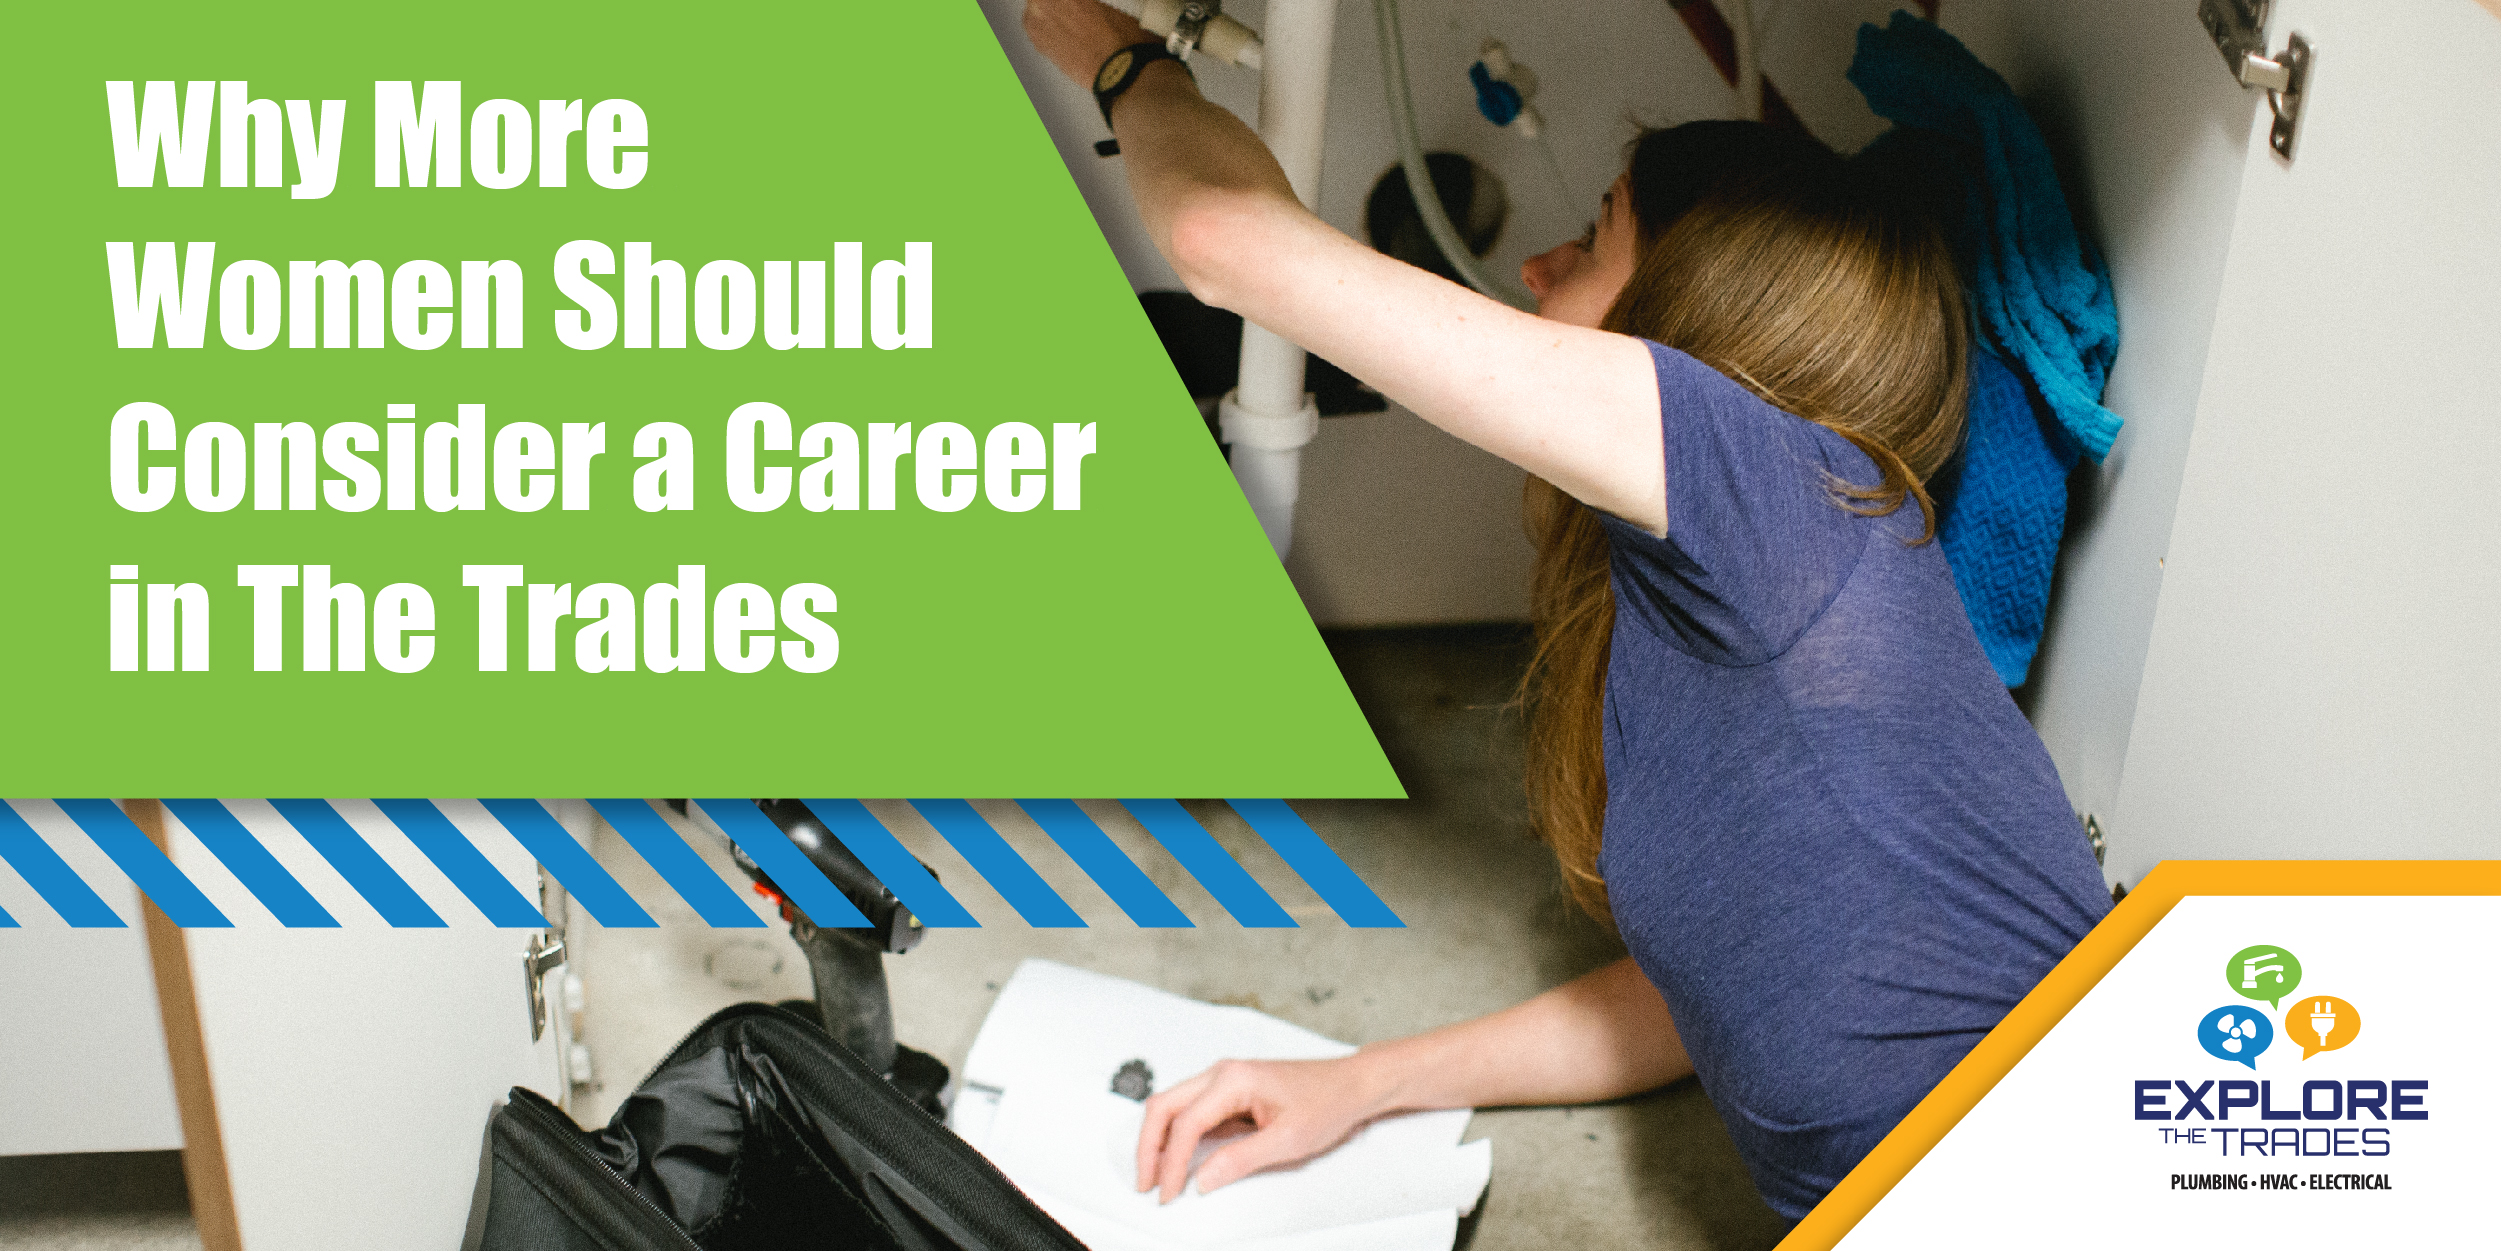 Why More Women Should Consider a Career in the Trades